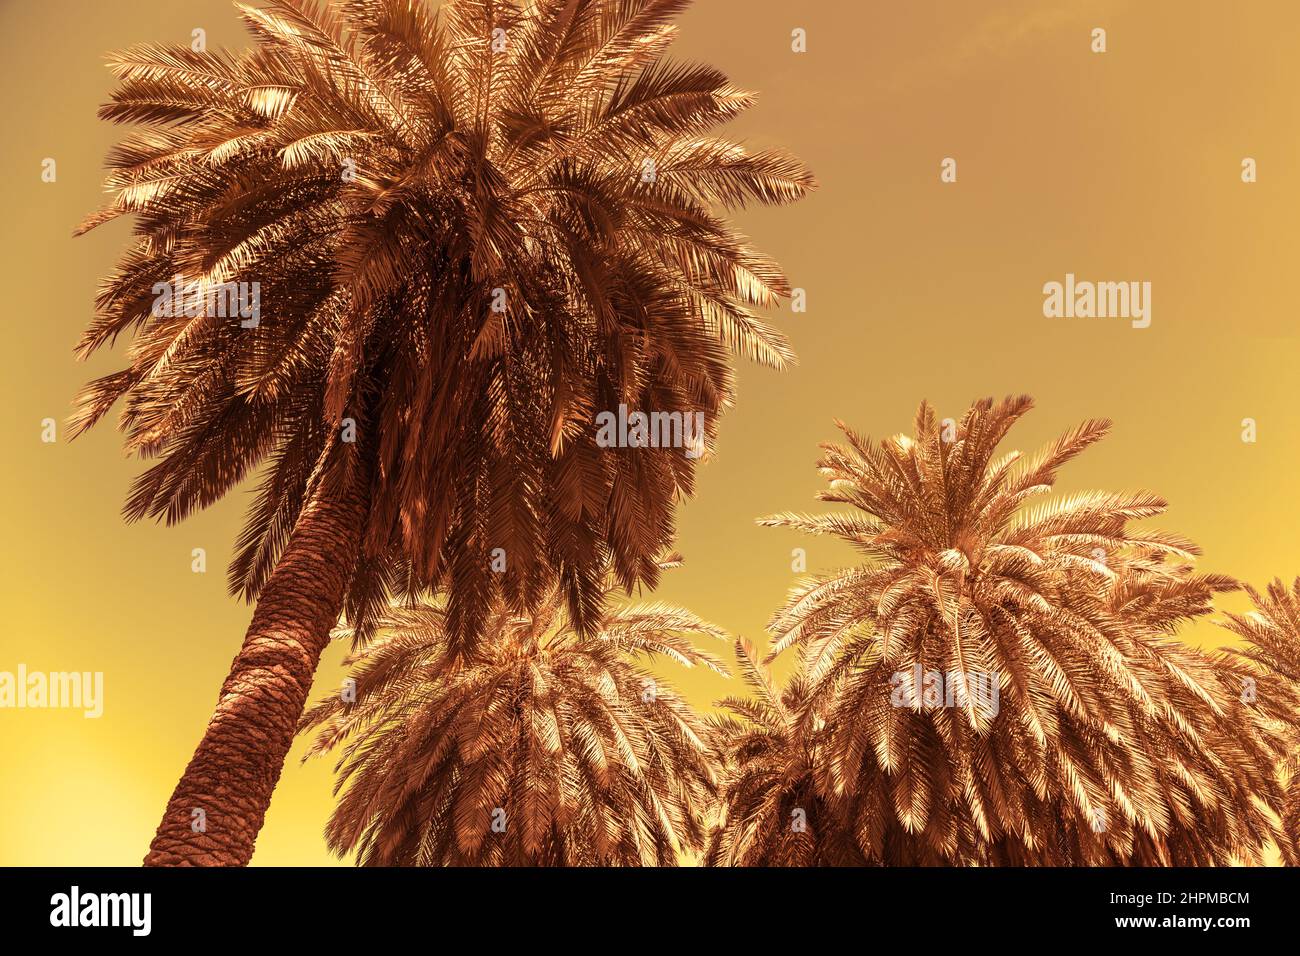 Date palms on the background of a golden sunset sky Stock Photo